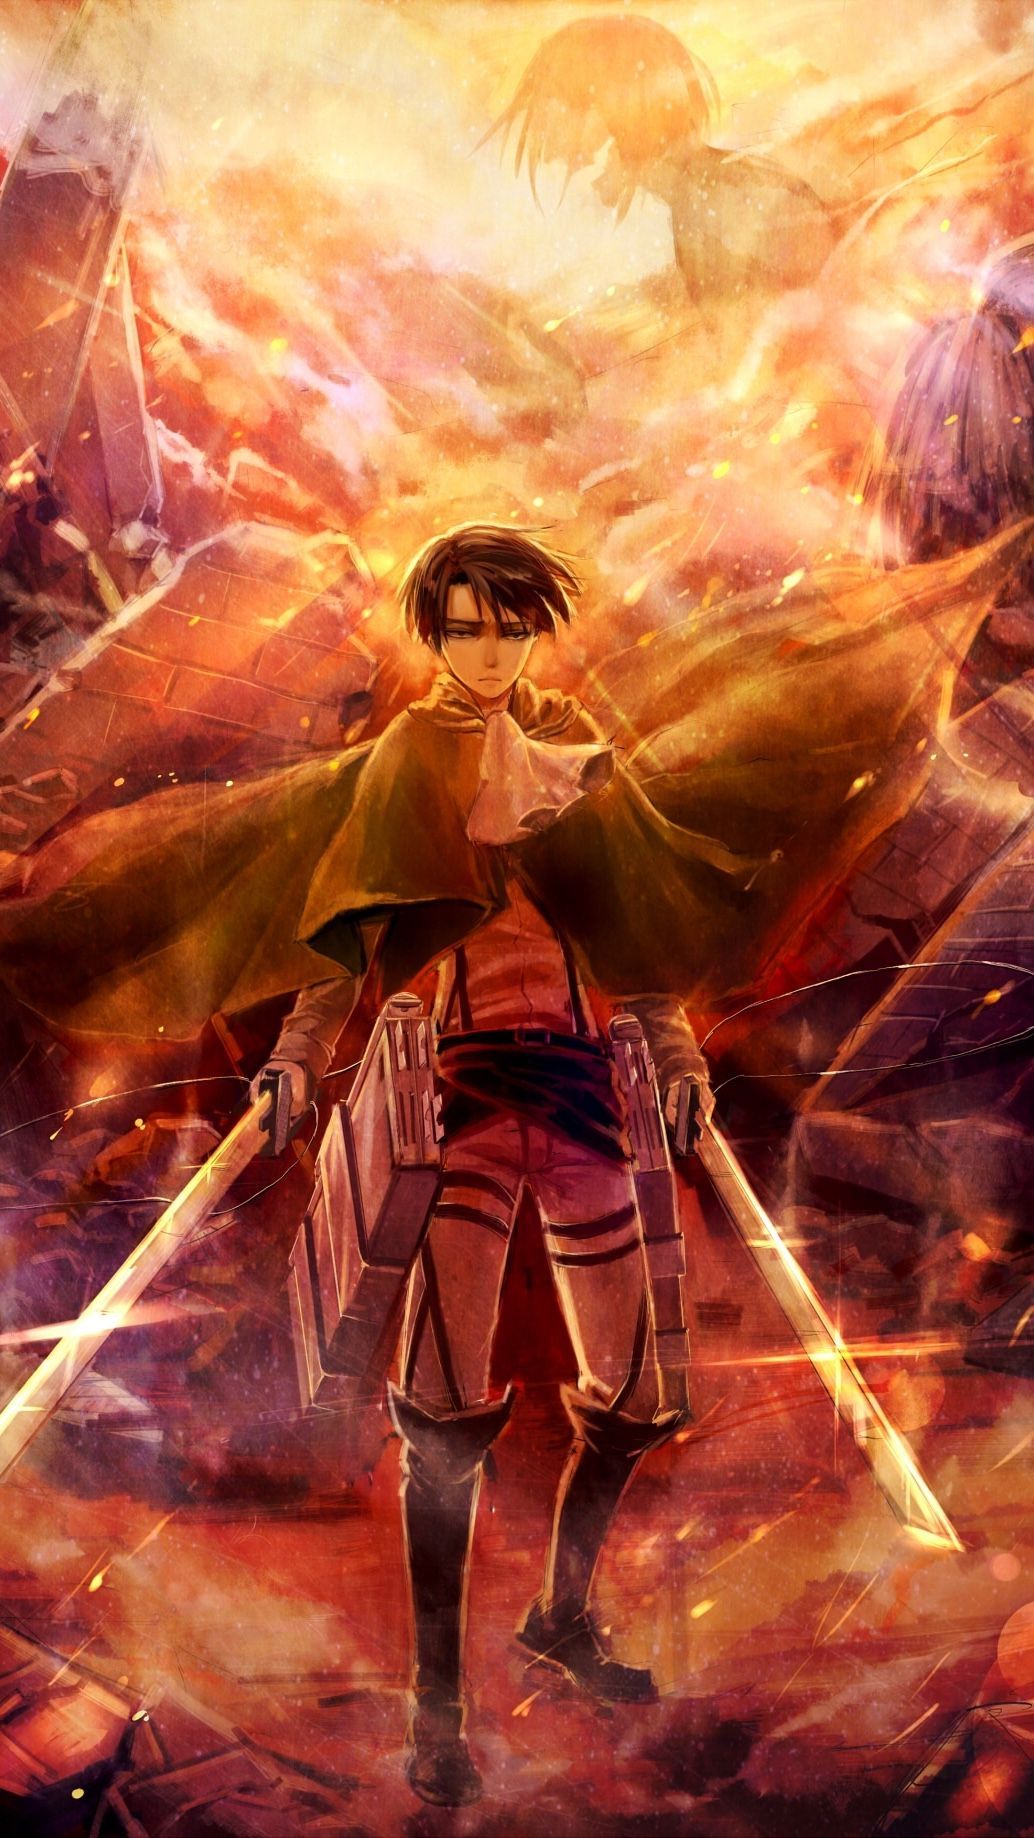 Check the link to download HD wallpaper of attack on titan and more